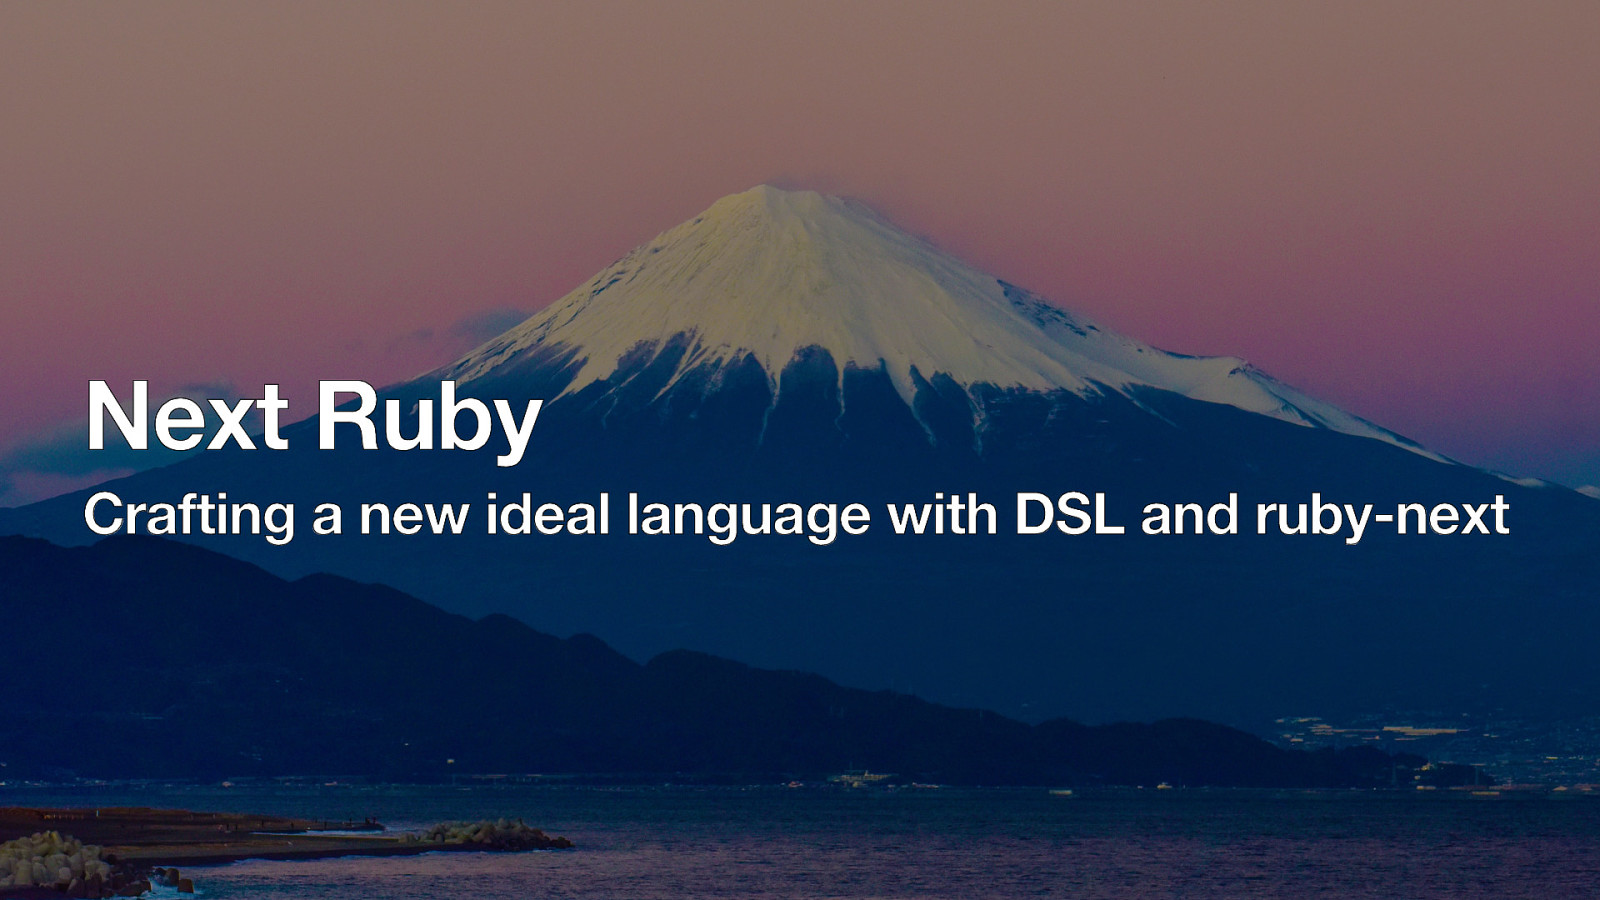  Next Ruby. Crafting a new ideal language with DSL and ruby-next